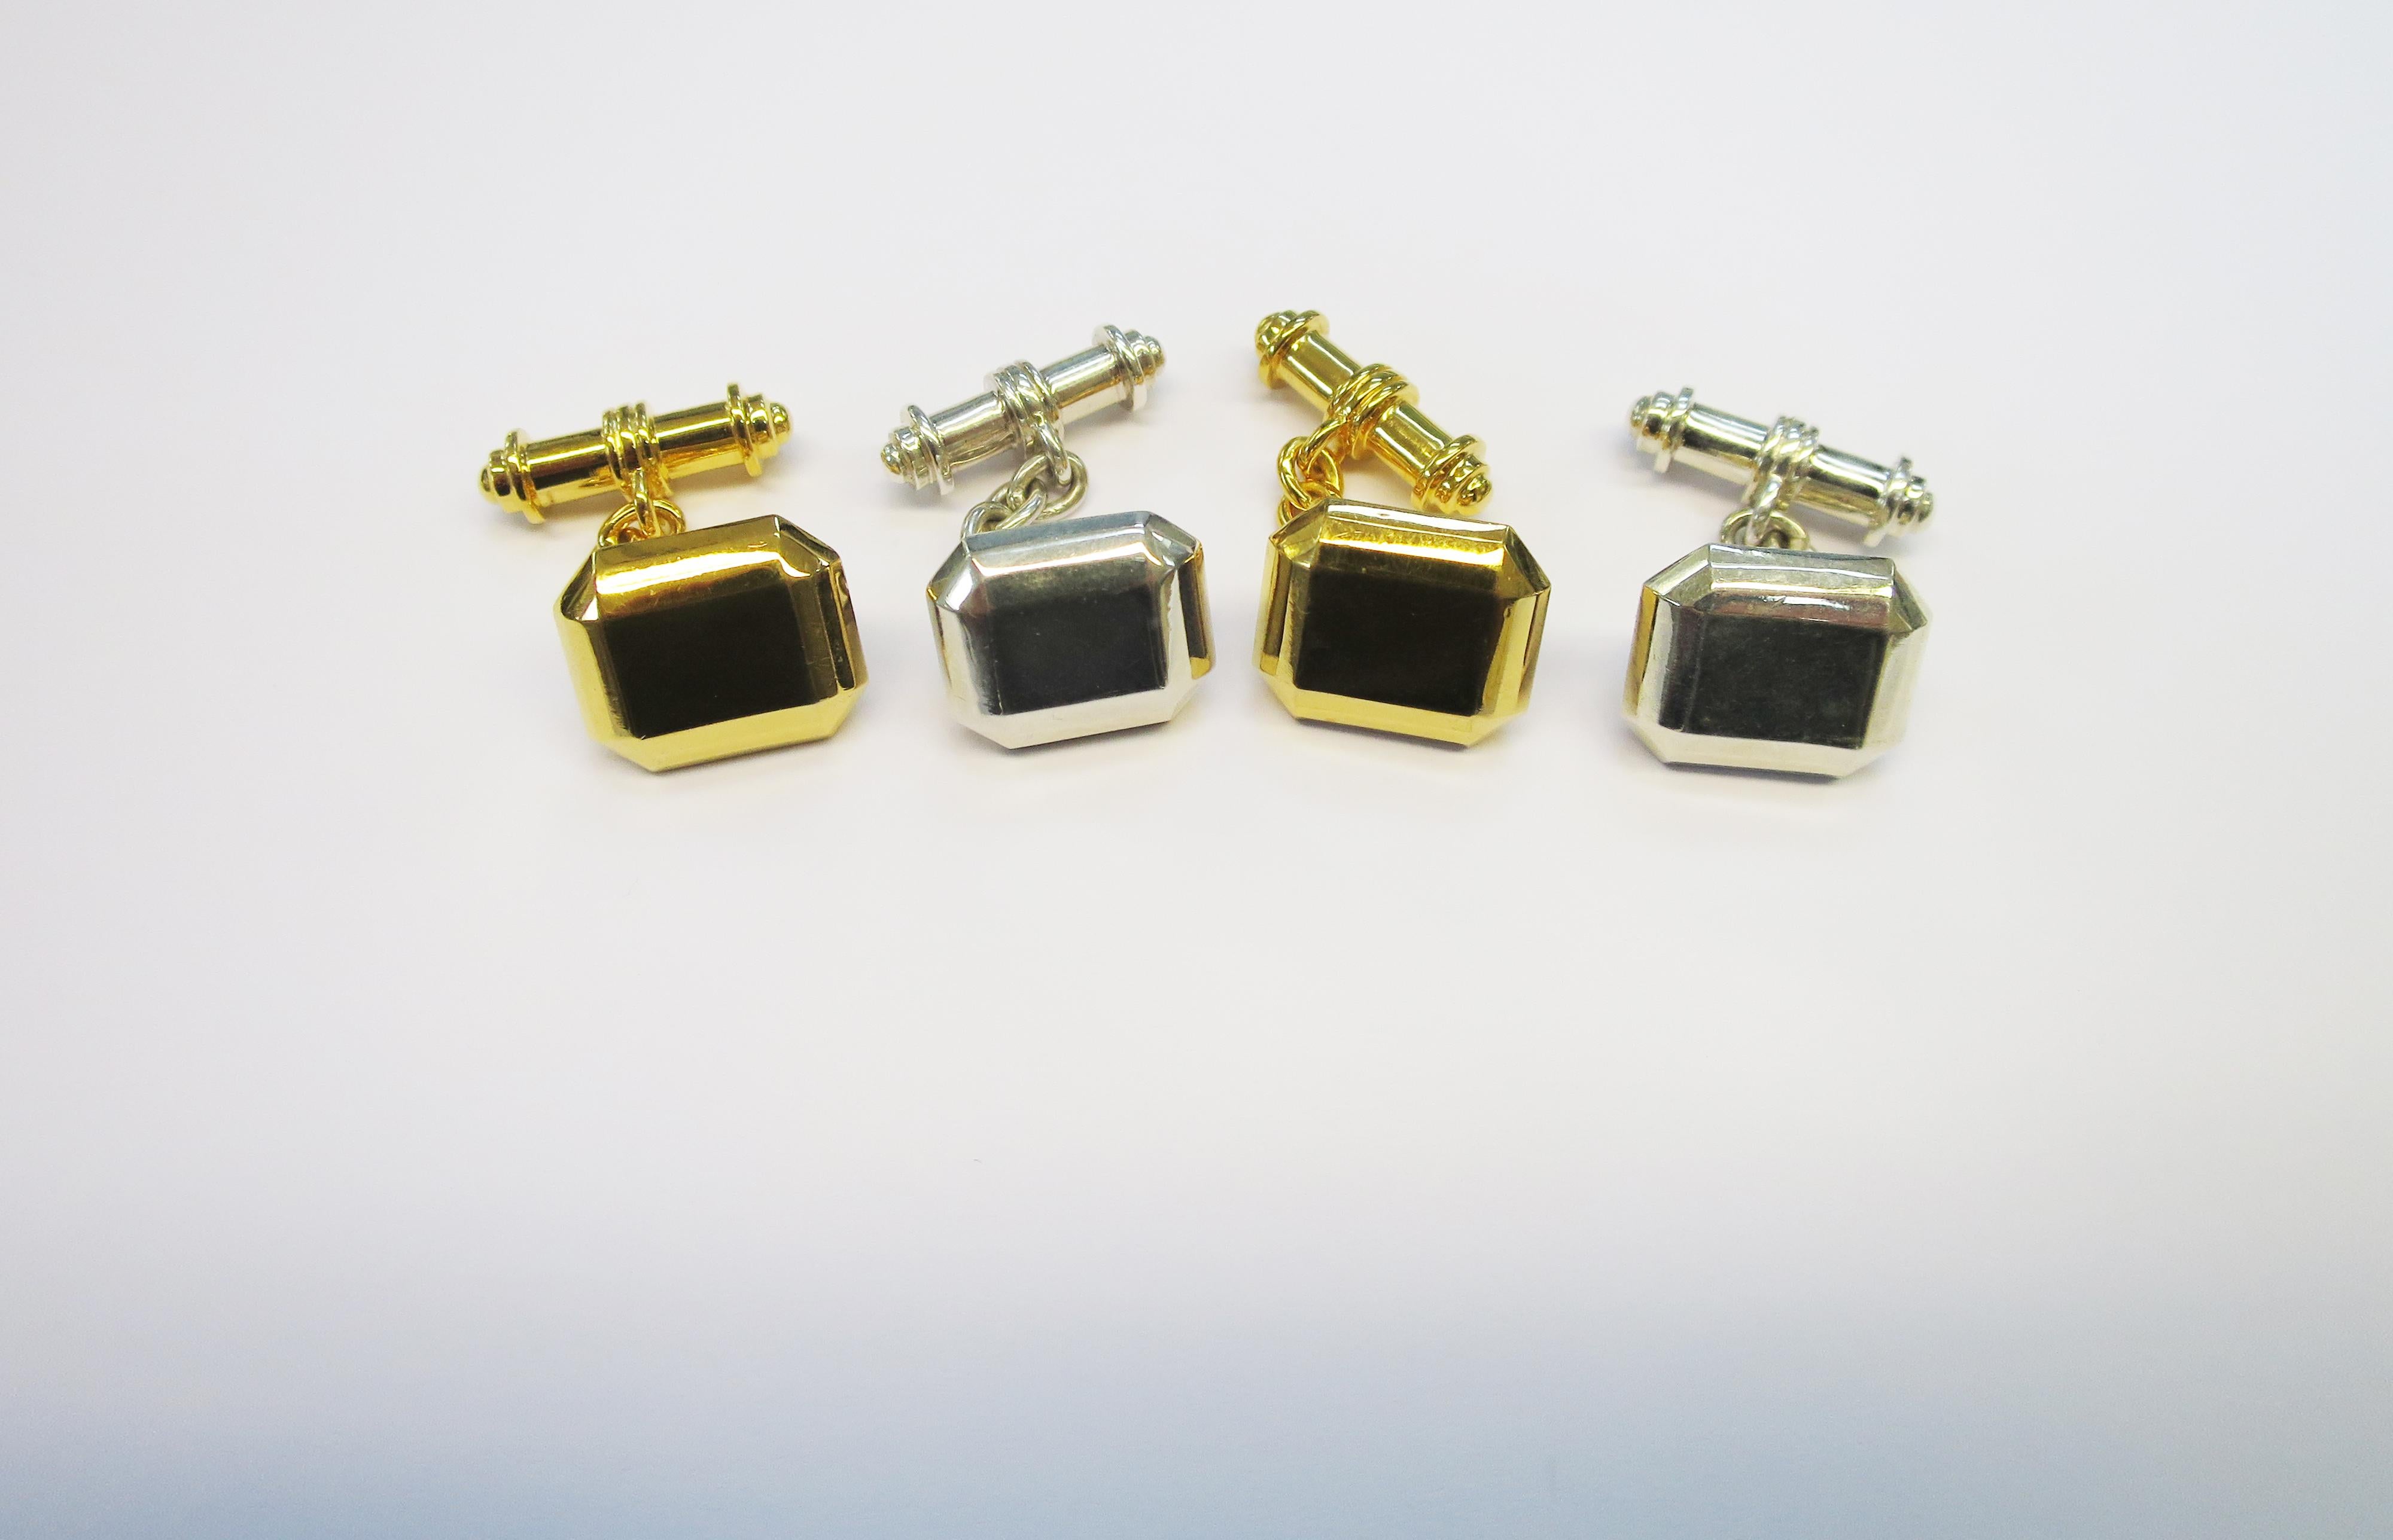 18ct yellow gold vermeil chain-link cufflinks

Timeless and failsafe, these gemstone-inspired cufflinks are the perfect everyday accessory for any gentleman, young or old. Hailing from the designer's Emperor's New Clothes collection, these cufflinks